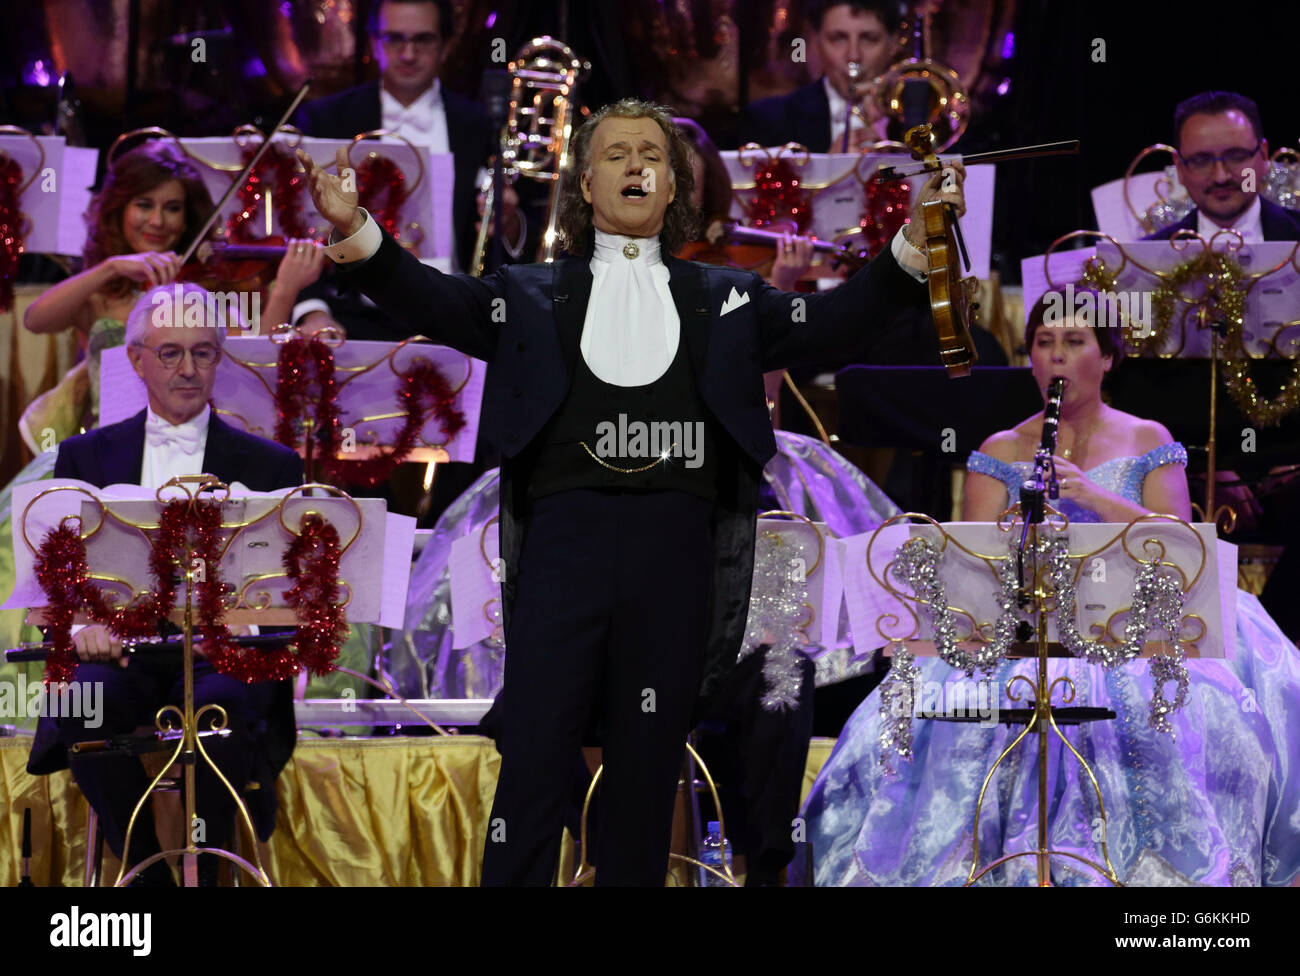 Andre Rieu performance - London. Dutch violinist and conductor Andre Rieu performs at Wembley Arena, London. Stock Photo